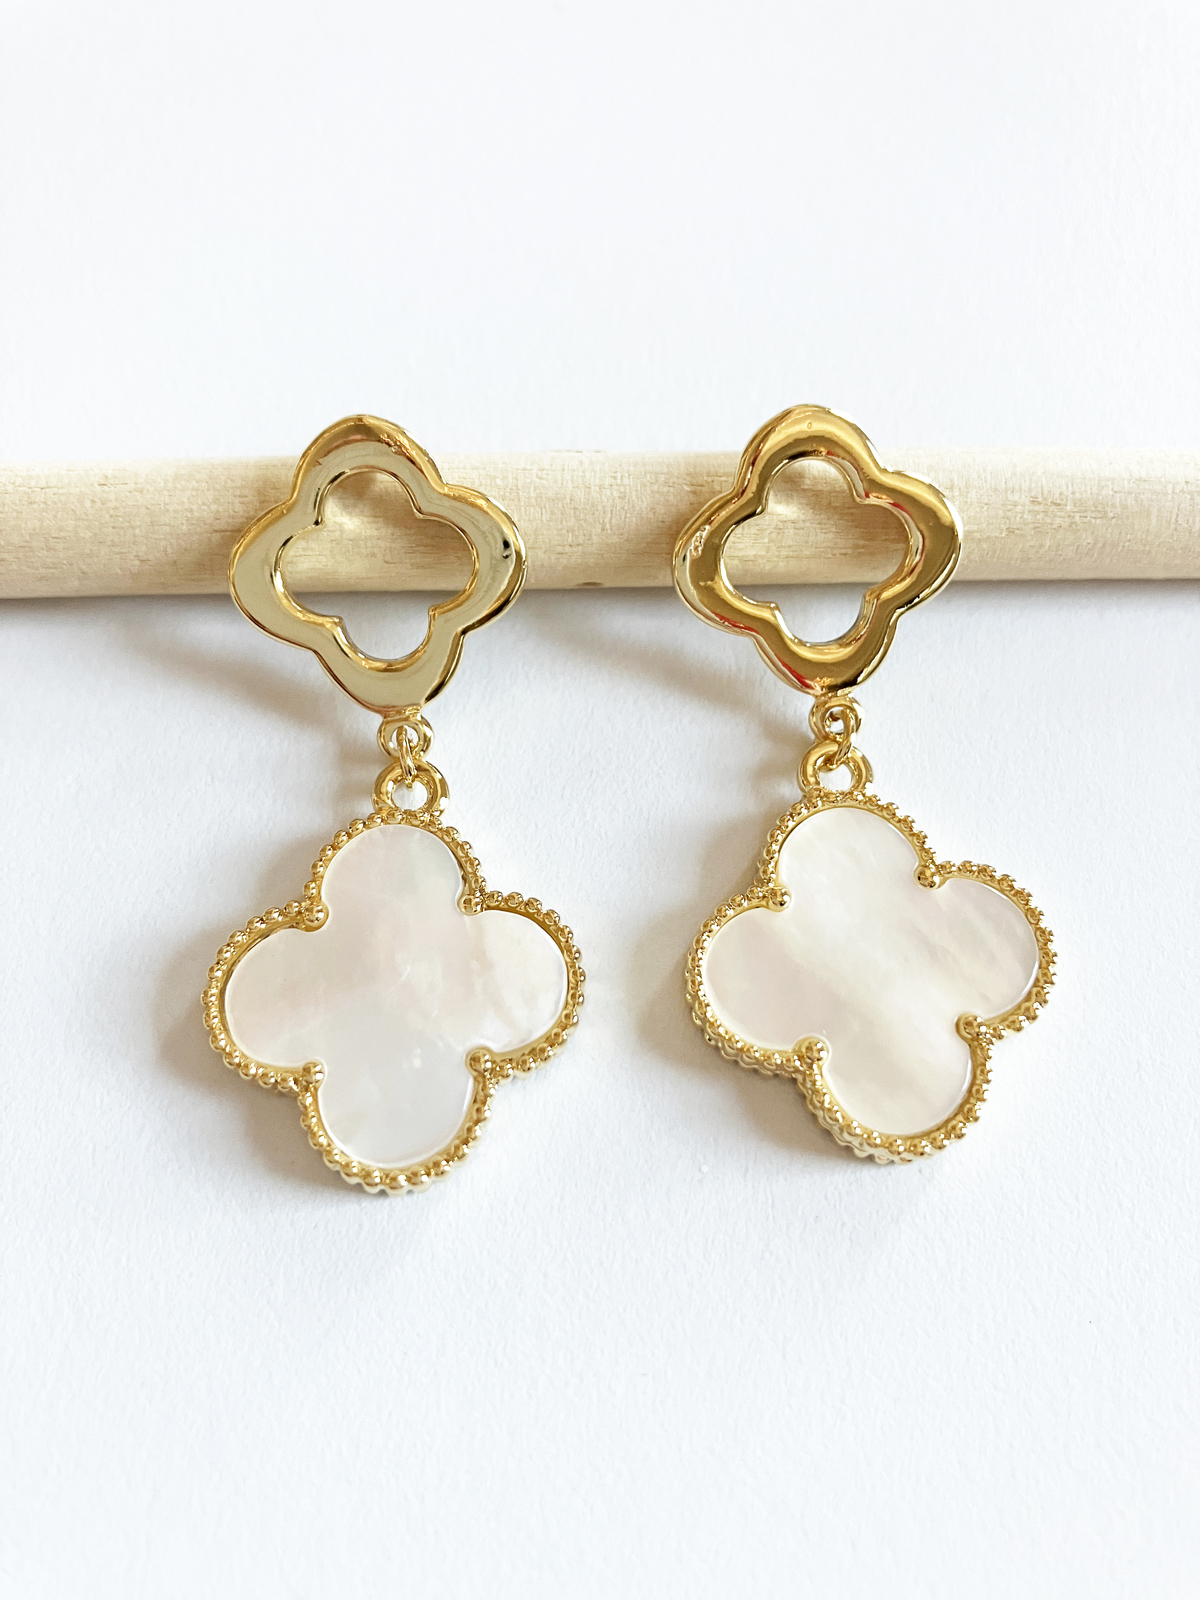 Gold Openwork and Mother of Pearl Quatrefoil Double-drop Earrings - $55.00